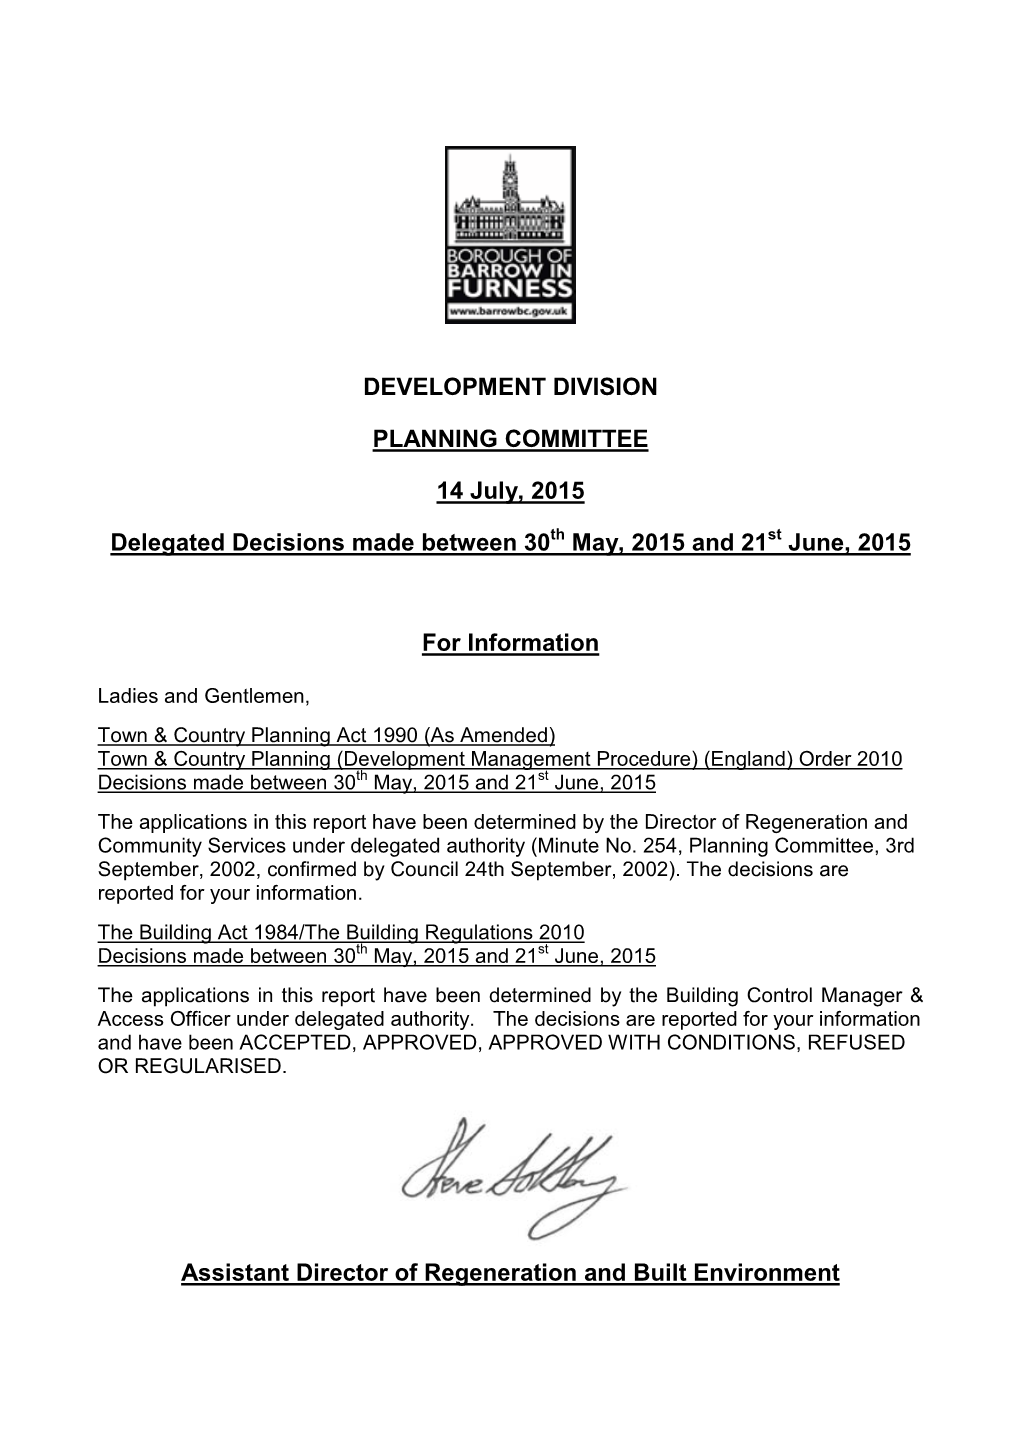 DEVELOPMENT DIVISION PLANNING COMMITTEE 14 July, 2015 Delegated Decisions Made Between 30 May, 2015 and 21 June, 2015 for Inform